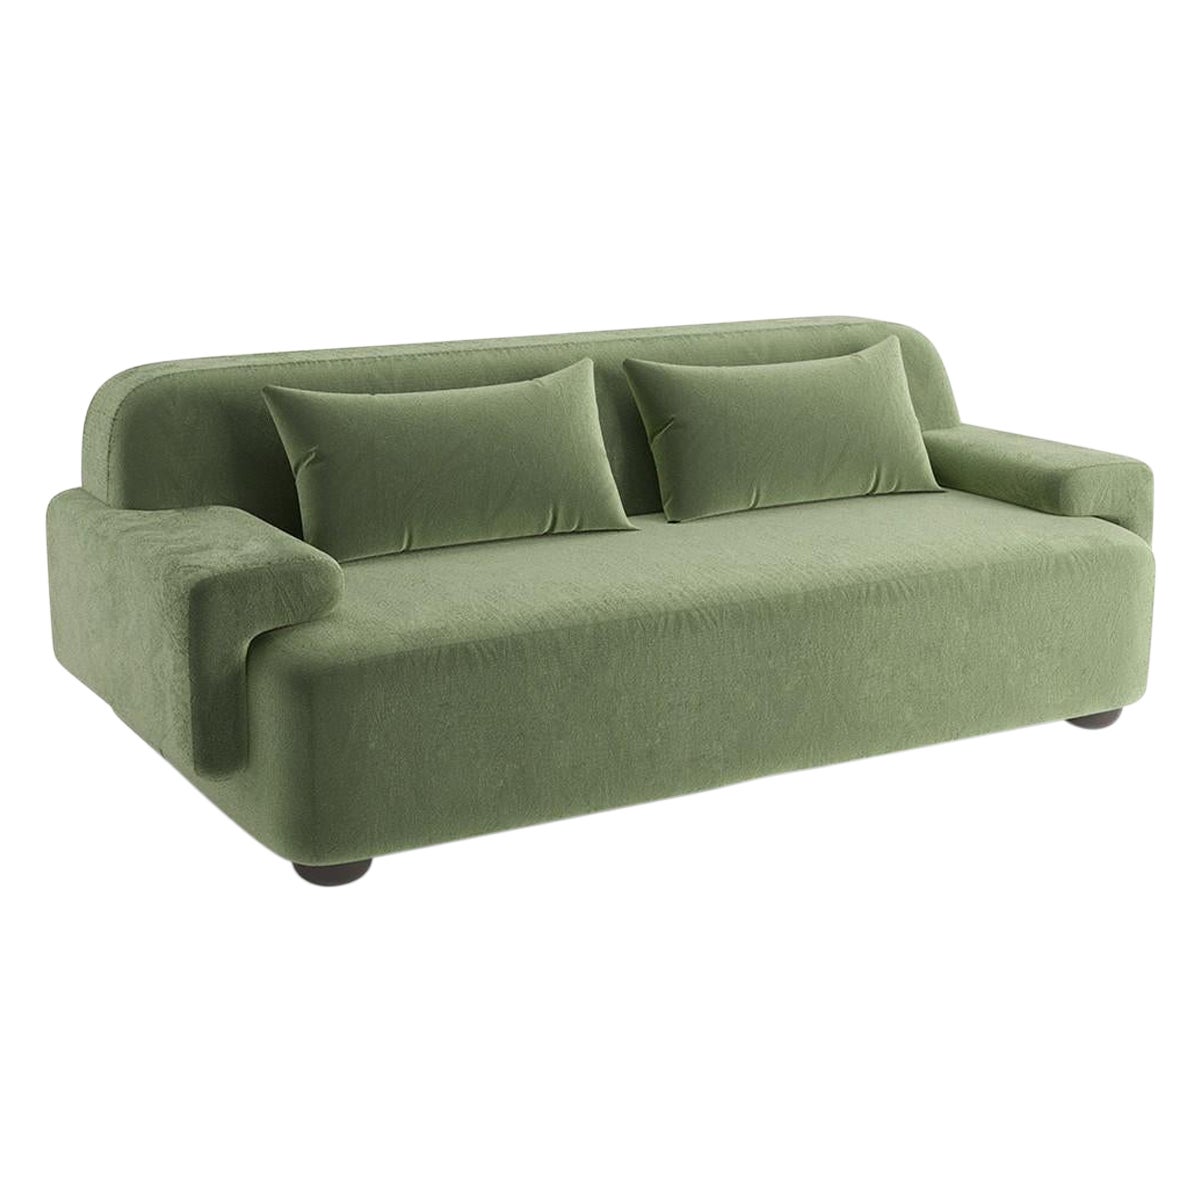 Popus Editions Lena 2.5 Seater Sofa in Green Verone Velvet Upholstery For Sale